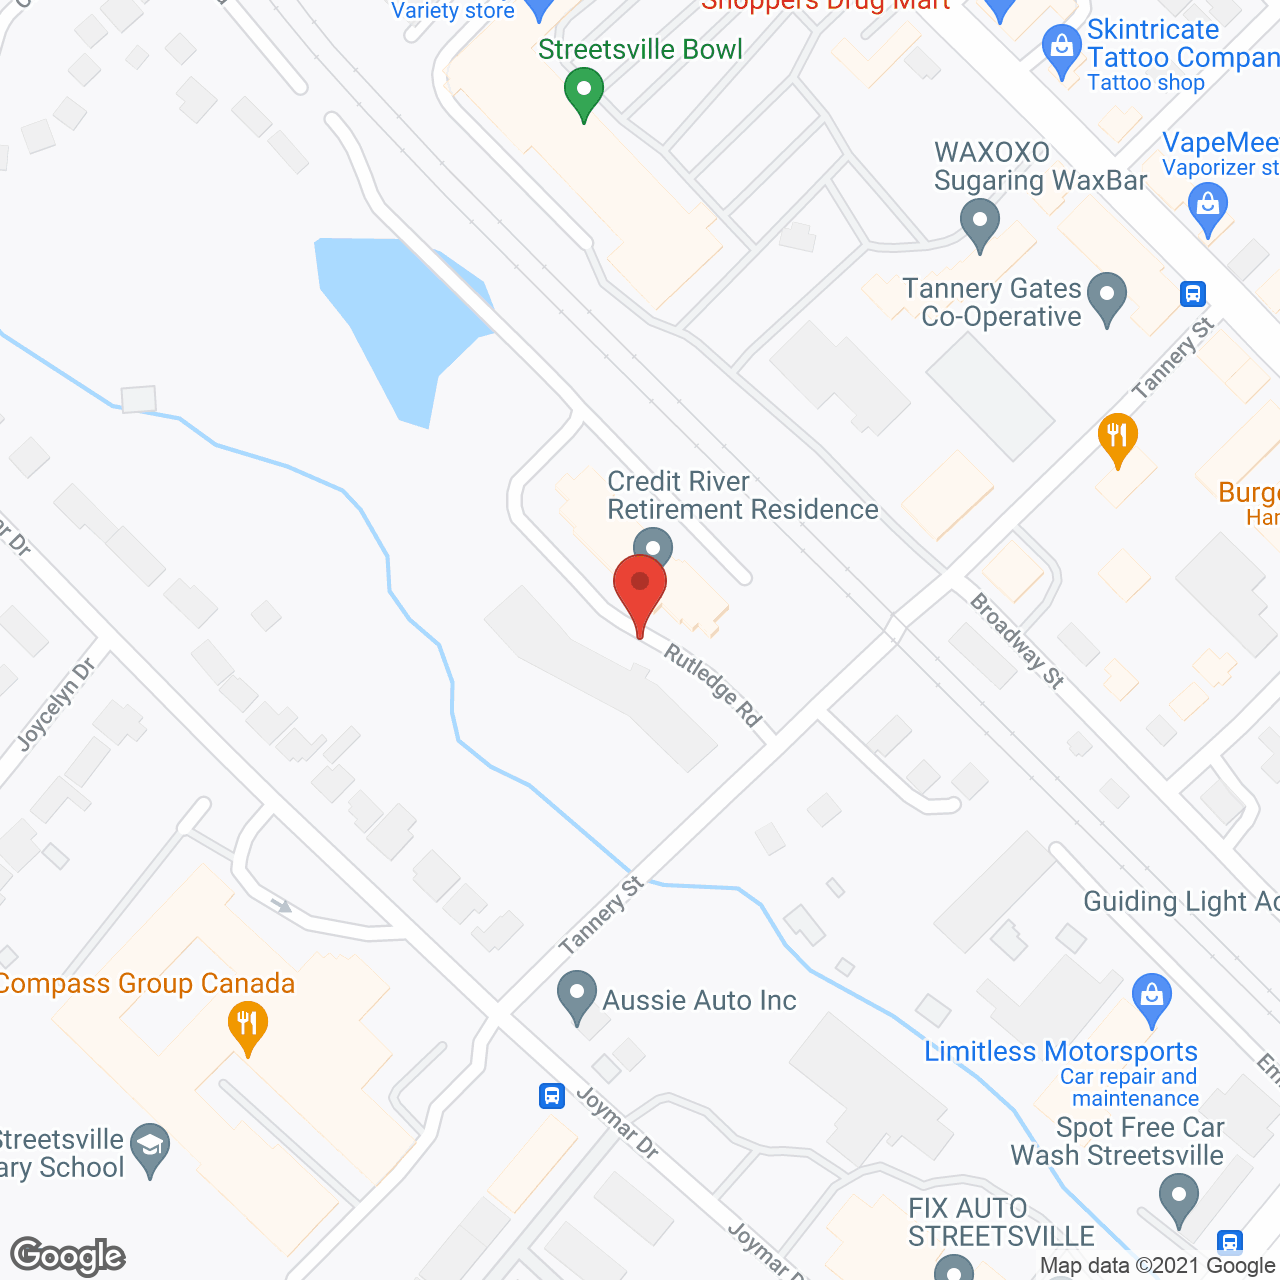 Credit River Retirement Residence in google map